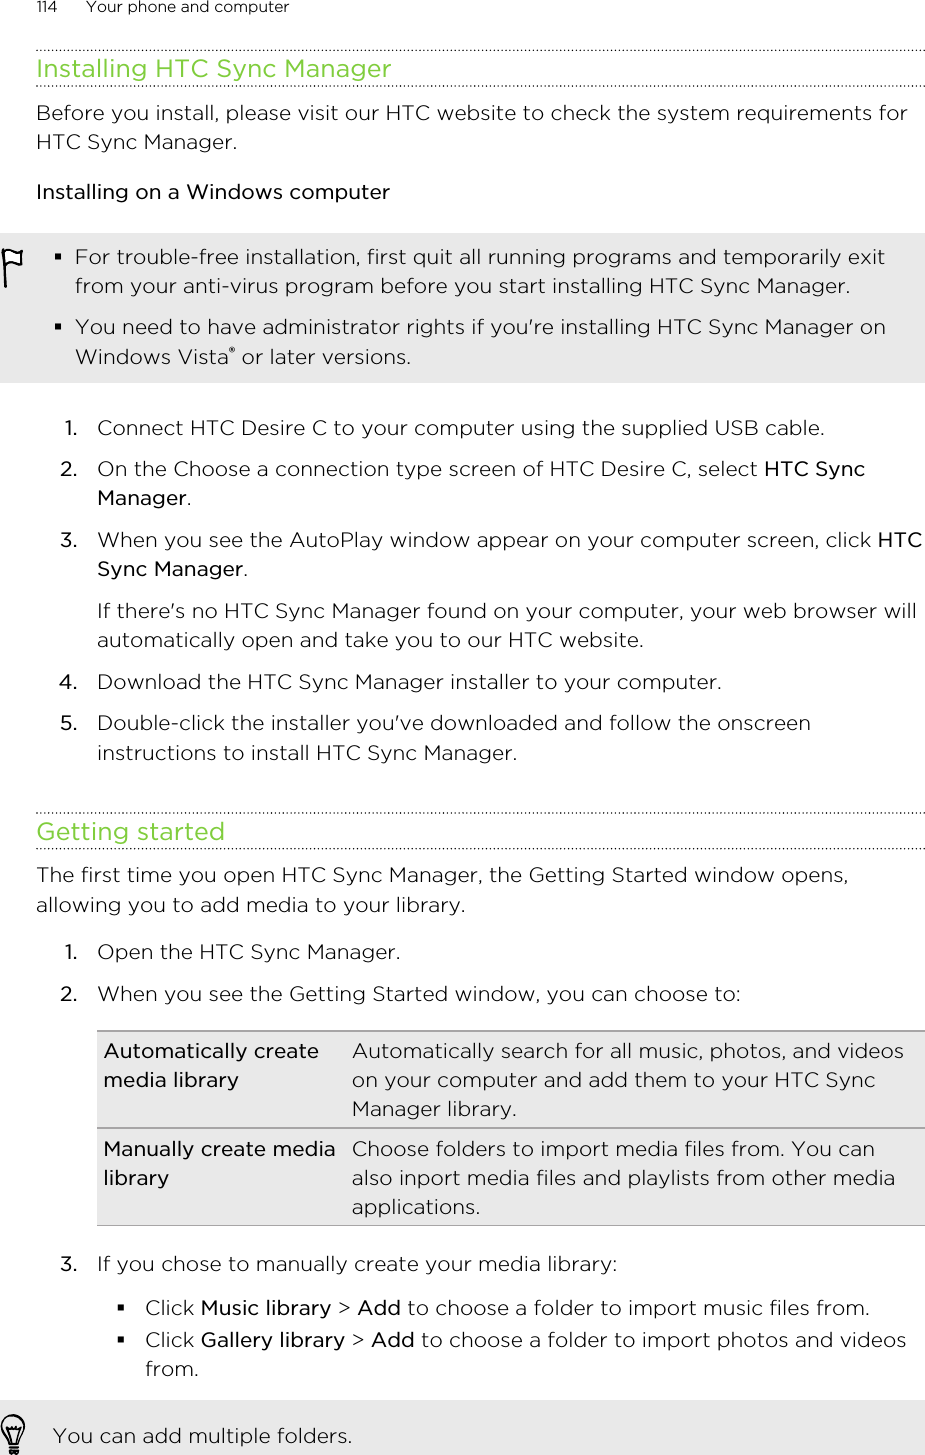 Installing HTC Sync ManagerBefore you install, please visit our HTC website to check the system requirements forHTC Sync Manager.Installing on a Windows computer§For trouble-free installation, first quit all running programs and temporarily exitfrom your anti-virus program before you start installing HTC Sync Manager.§You need to have administrator rights if you&apos;re installing HTC Sync Manager onWindows Vista® or later versions.1. Connect HTC Desire C to your computer using the supplied USB cable.2. On the Choose a connection type screen of HTC Desire C, select HTC SyncManager.3. When you see the AutoPlay window appear on your computer screen, click HTCSync Manager. If there&apos;s no HTC Sync Manager found on your computer, your web browser willautomatically open and take you to our HTC website.4. Download the HTC Sync Manager installer to your computer.5. Double-click the installer you&apos;ve downloaded and follow the onscreeninstructions to install HTC Sync Manager.Getting startedThe first time you open HTC Sync Manager, the Getting Started window opens,allowing you to add media to your library.1. Open the HTC Sync Manager.2. When you see the Getting Started window, you can choose to:Automatically createmedia libraryAutomatically search for all music, photos, and videoson your computer and add them to your HTC SyncManager library.Manually create medialibraryChoose folders to import media files from. You canalso inport media files and playlists from other mediaapplications.3. If you chose to manually create your media library:§Click Music library &gt; Add to choose a folder to import music files from.§Click Gallery library &gt; Add to choose a folder to import photos and videosfrom.You can add multiple folders.114 Your phone and computer